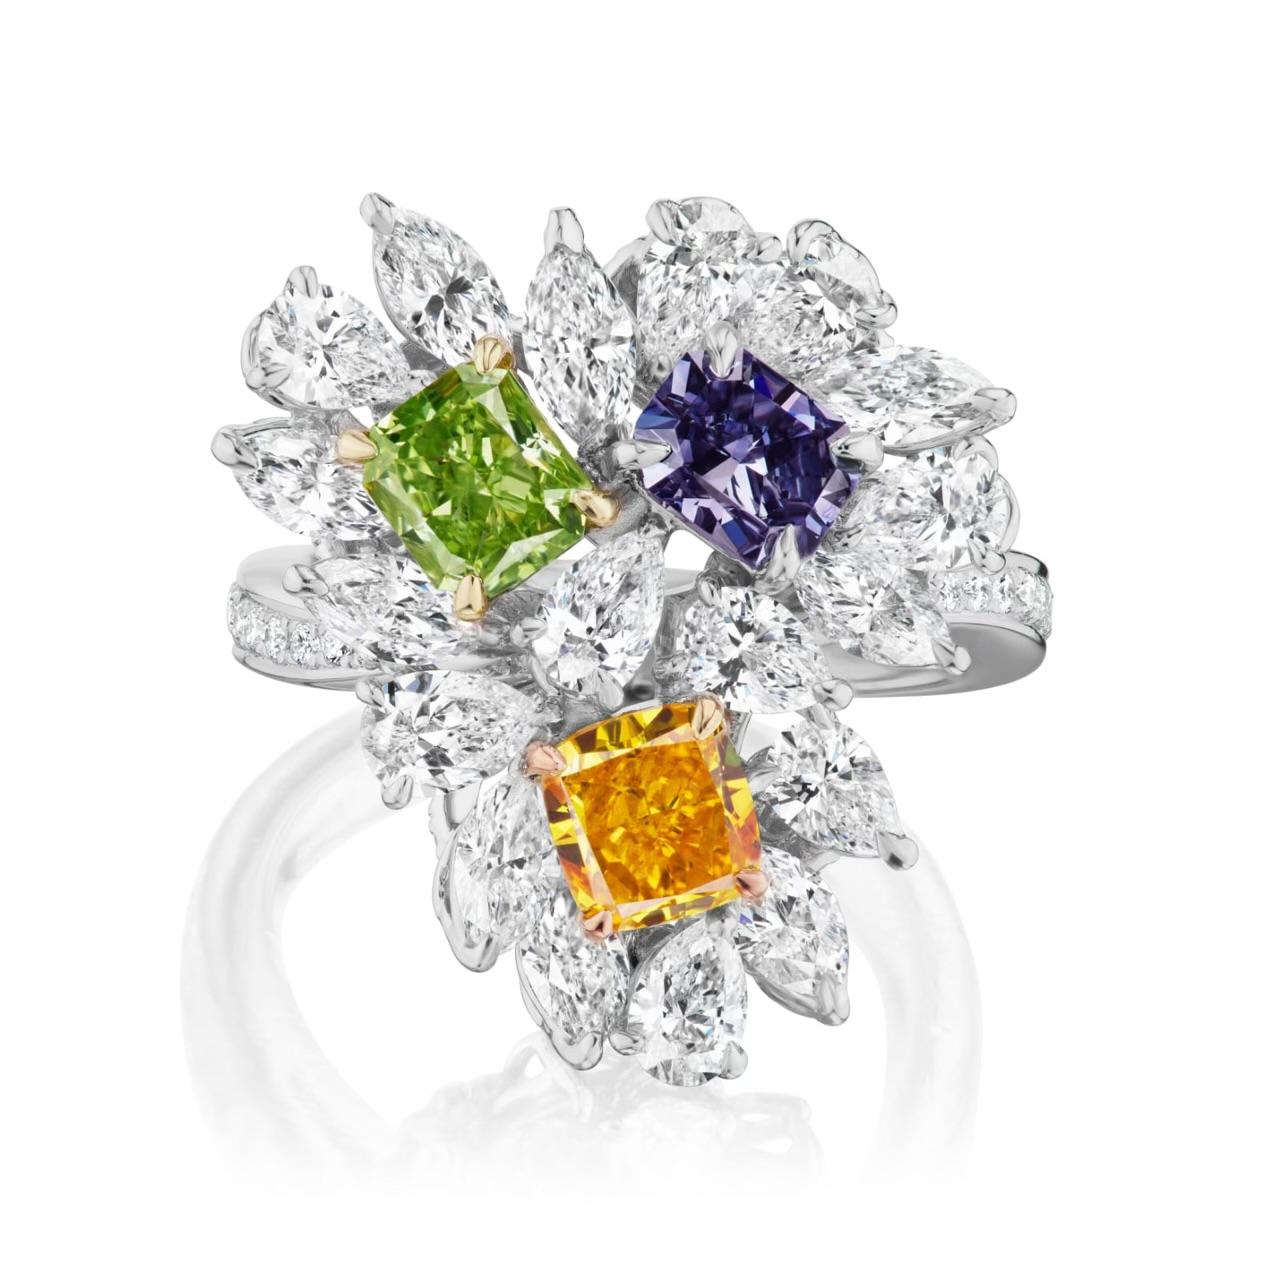 We are pleased to offer this Rare Ladies Platinum & 14k Gold GIA Certified Fancy Colored Orange, Blue & Green Diamond 3 Stone Ring. This stunning ring features 4.43ctw natural fancy, fancy vivid and white colored diamonds. The three beautiful and